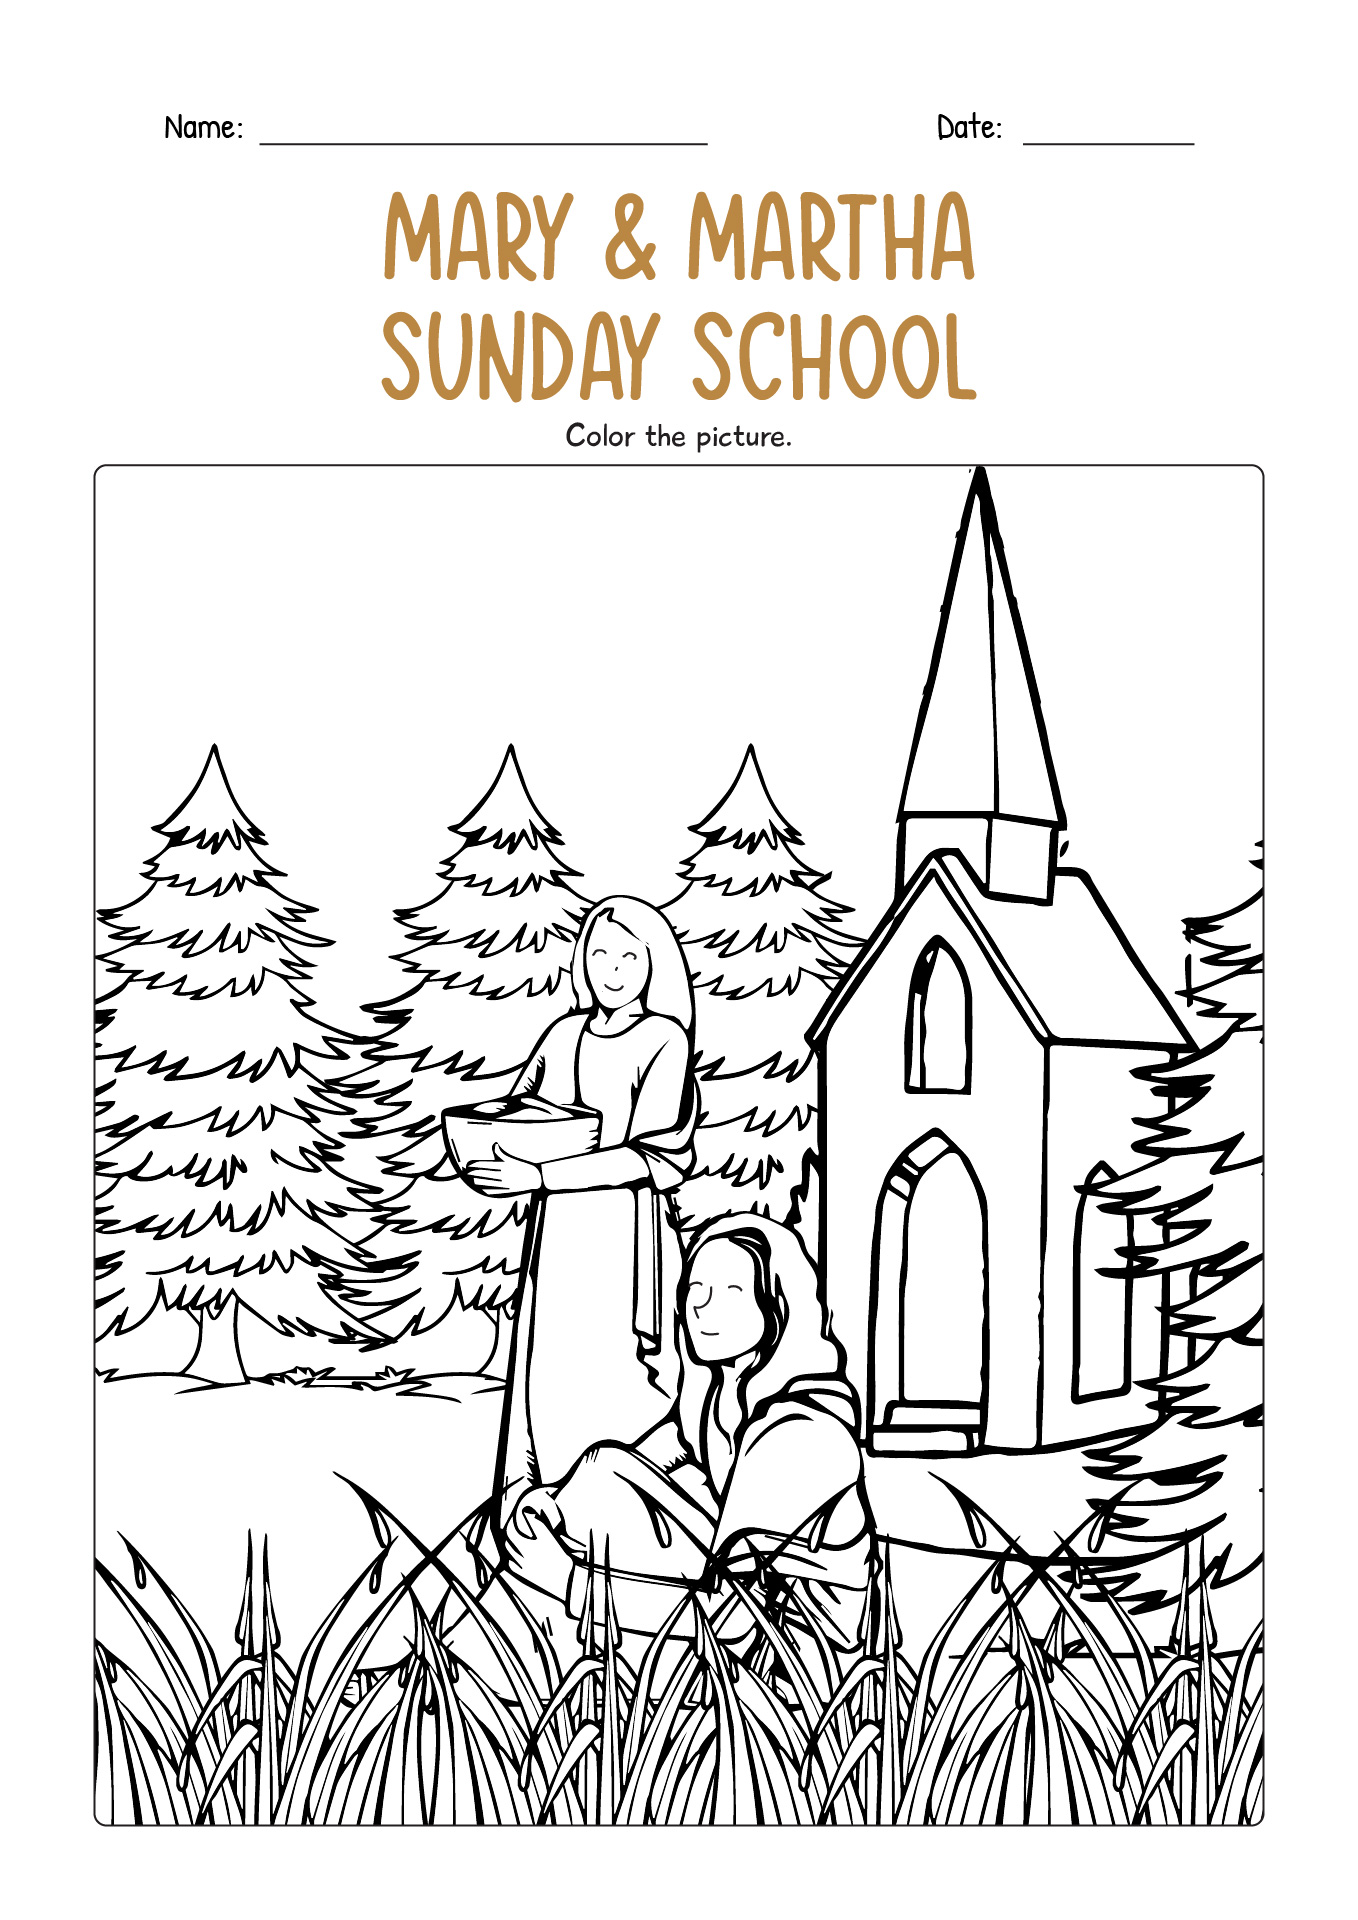 Mary and Martha Sunday School Coloring Pages